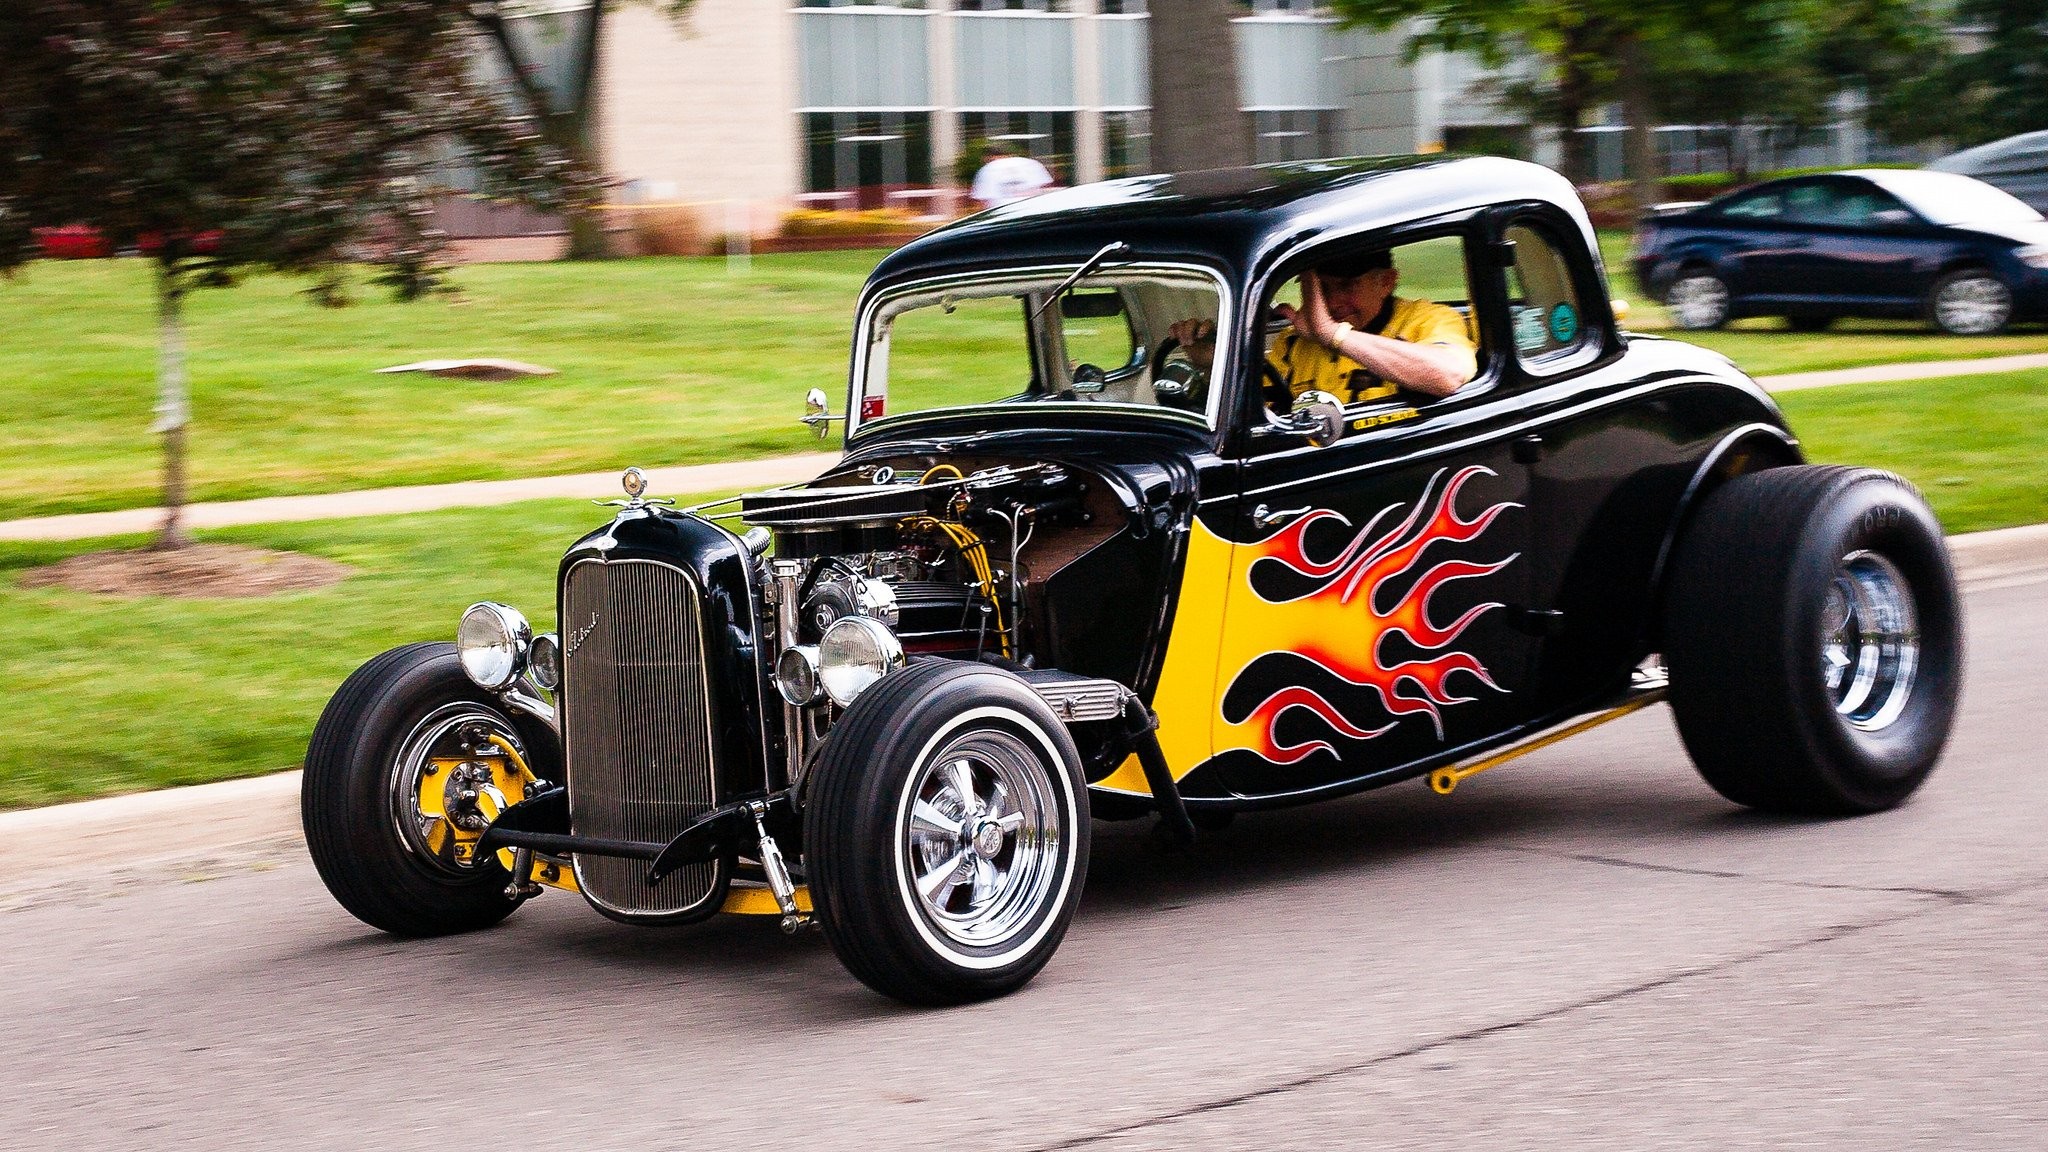 2048x1152 ... hot rods and girls | hot rod classic widescreen fresh new hd .